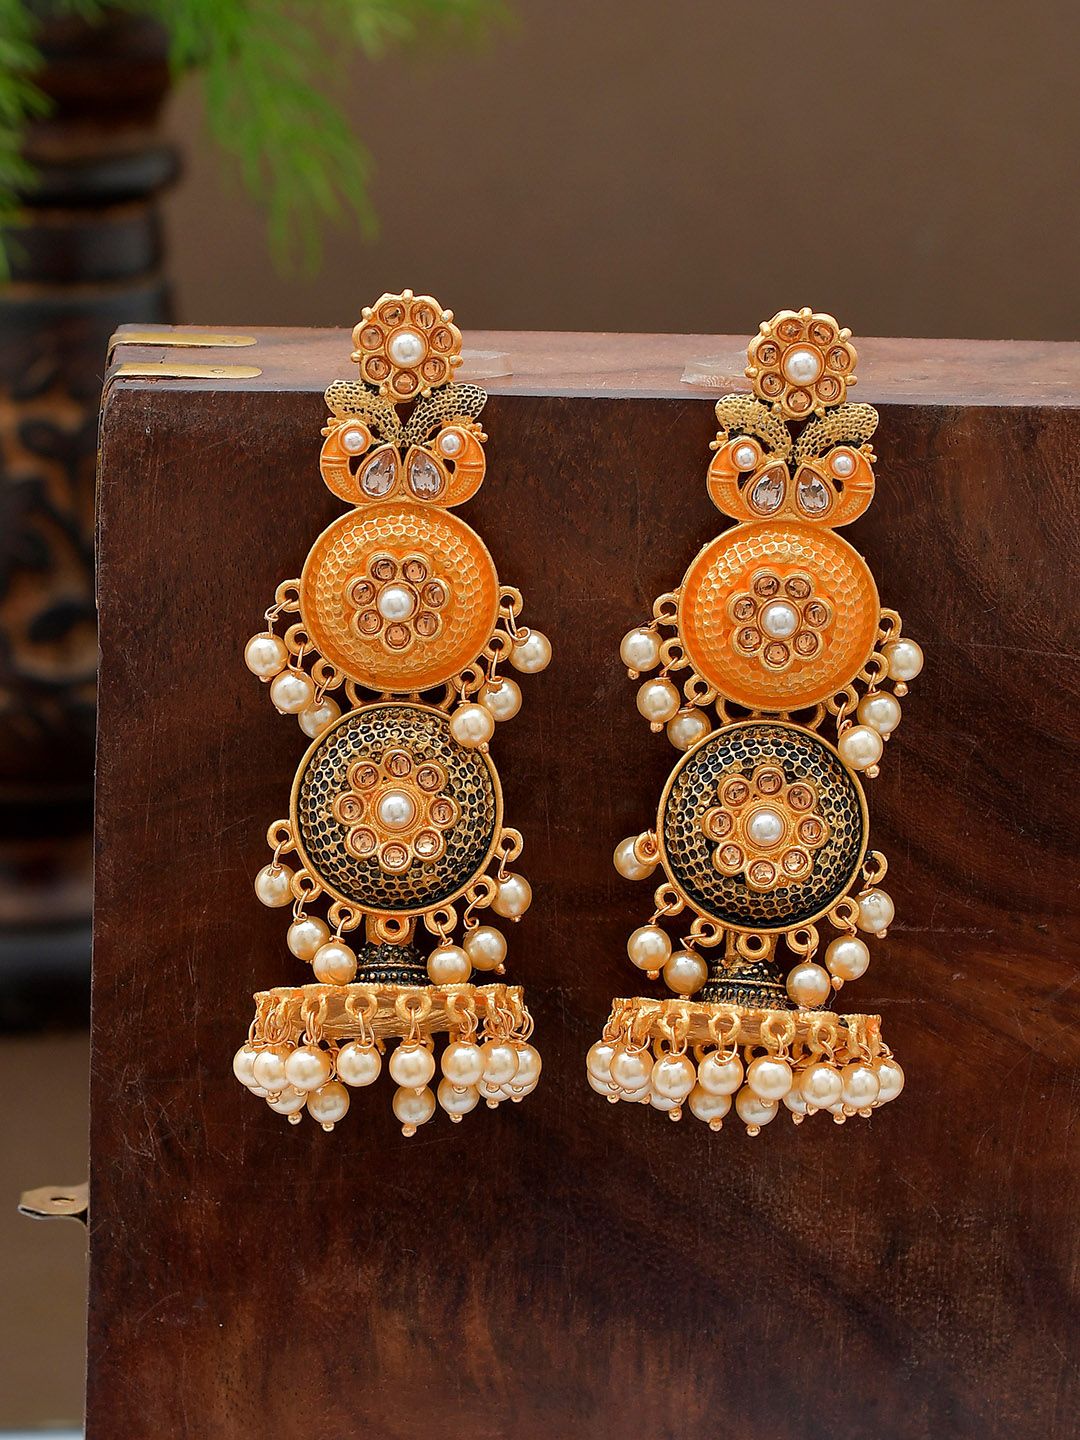 Shoshaa Gold-Toned Contemporary Jhumkas Earrings Price in India